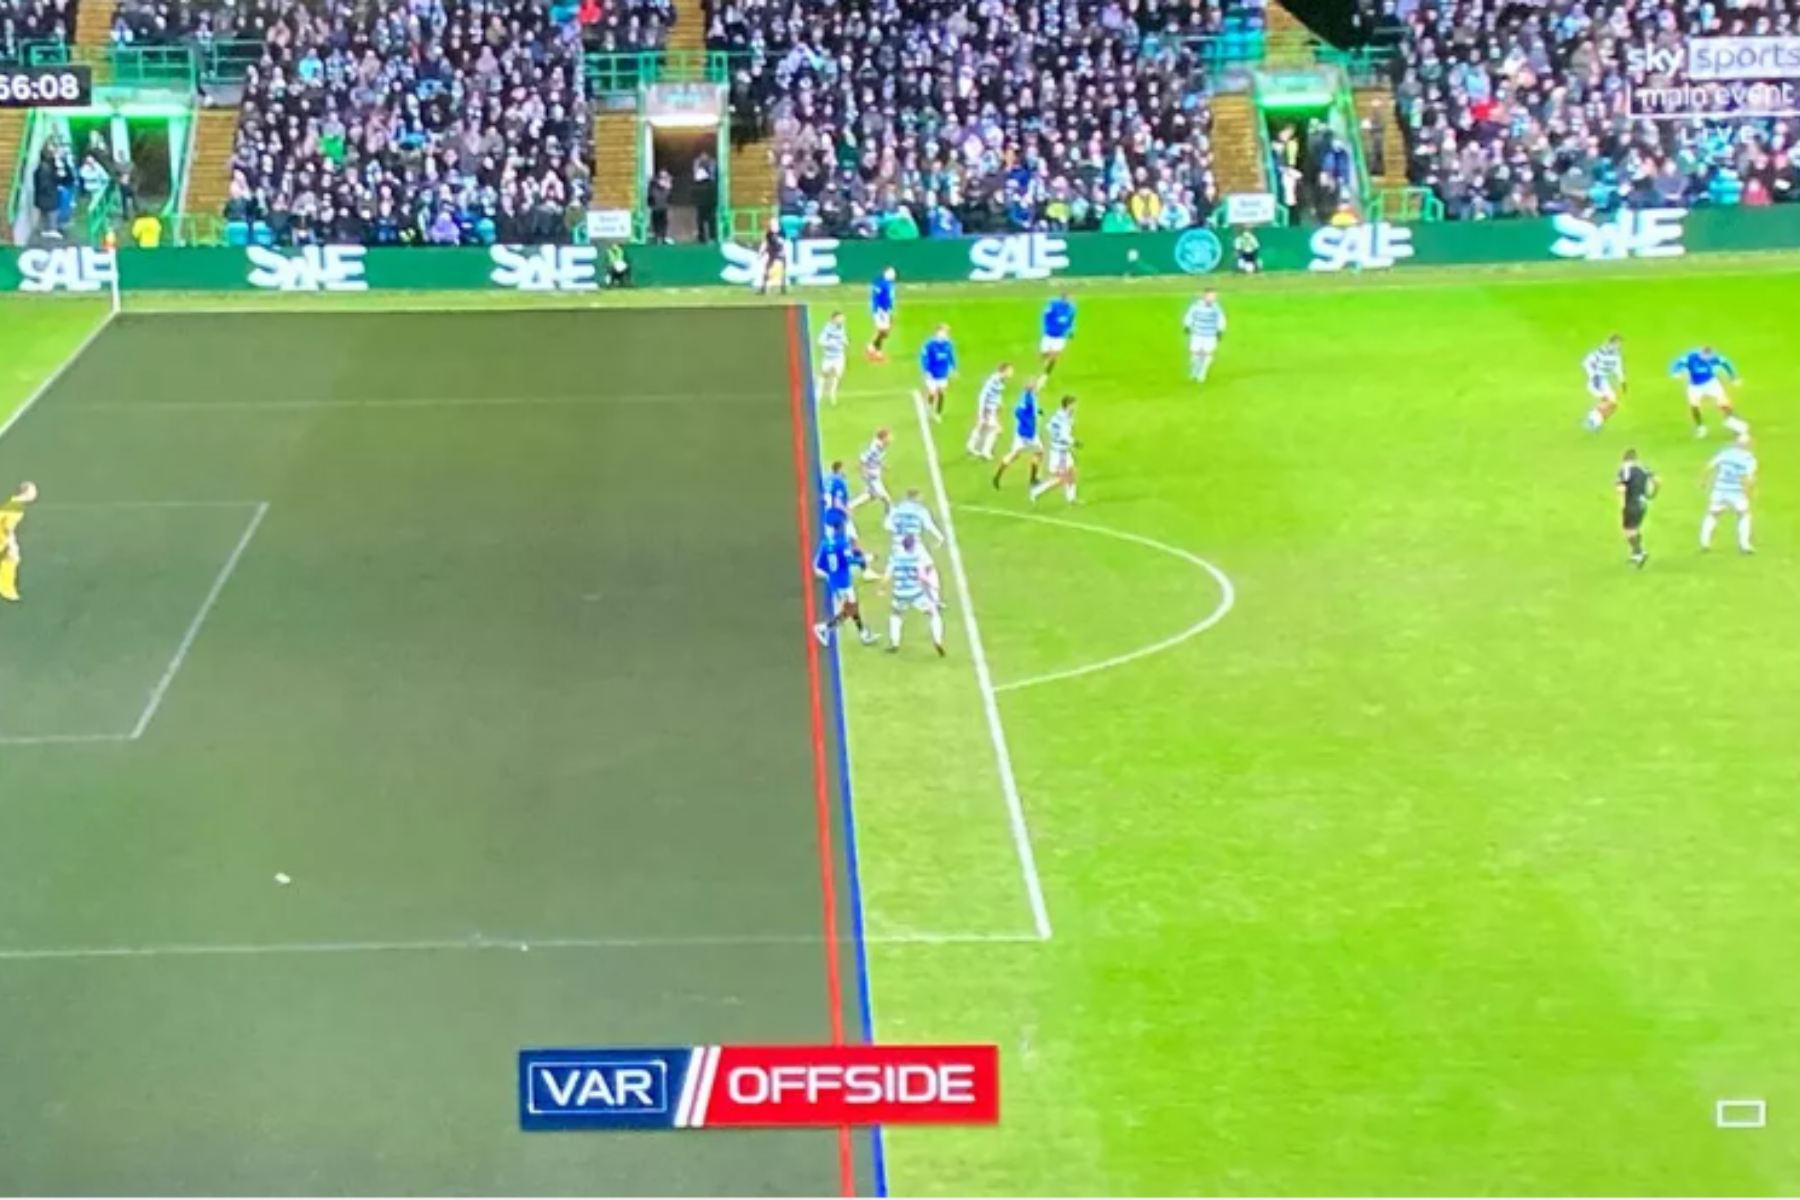 Celtic vs Rangers offside images cleared up by SFA chief